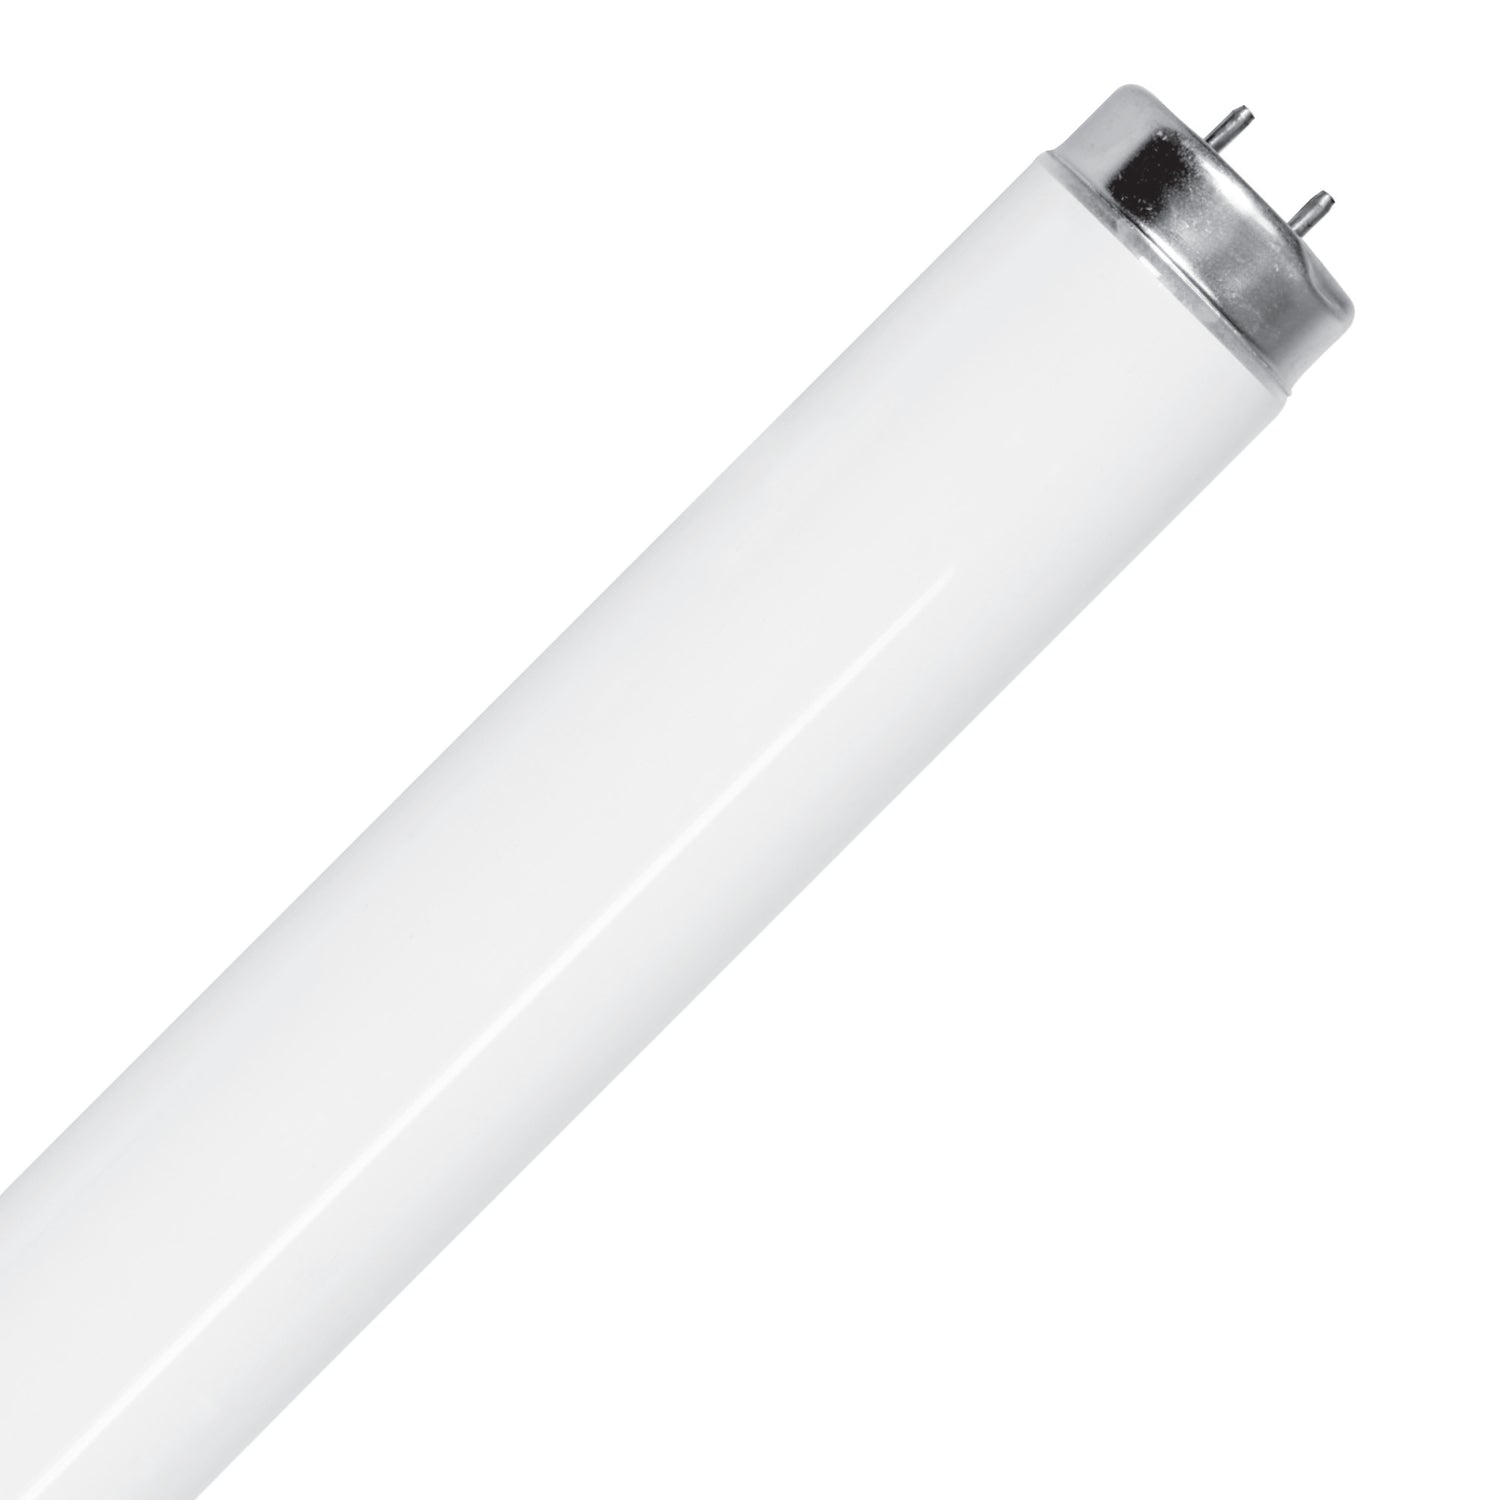 4 ft. 32W Daylight Deluxe White (6500K) G13 Base (T8 Replacement) Fluorescent Linear Light Tube (10-Pack)